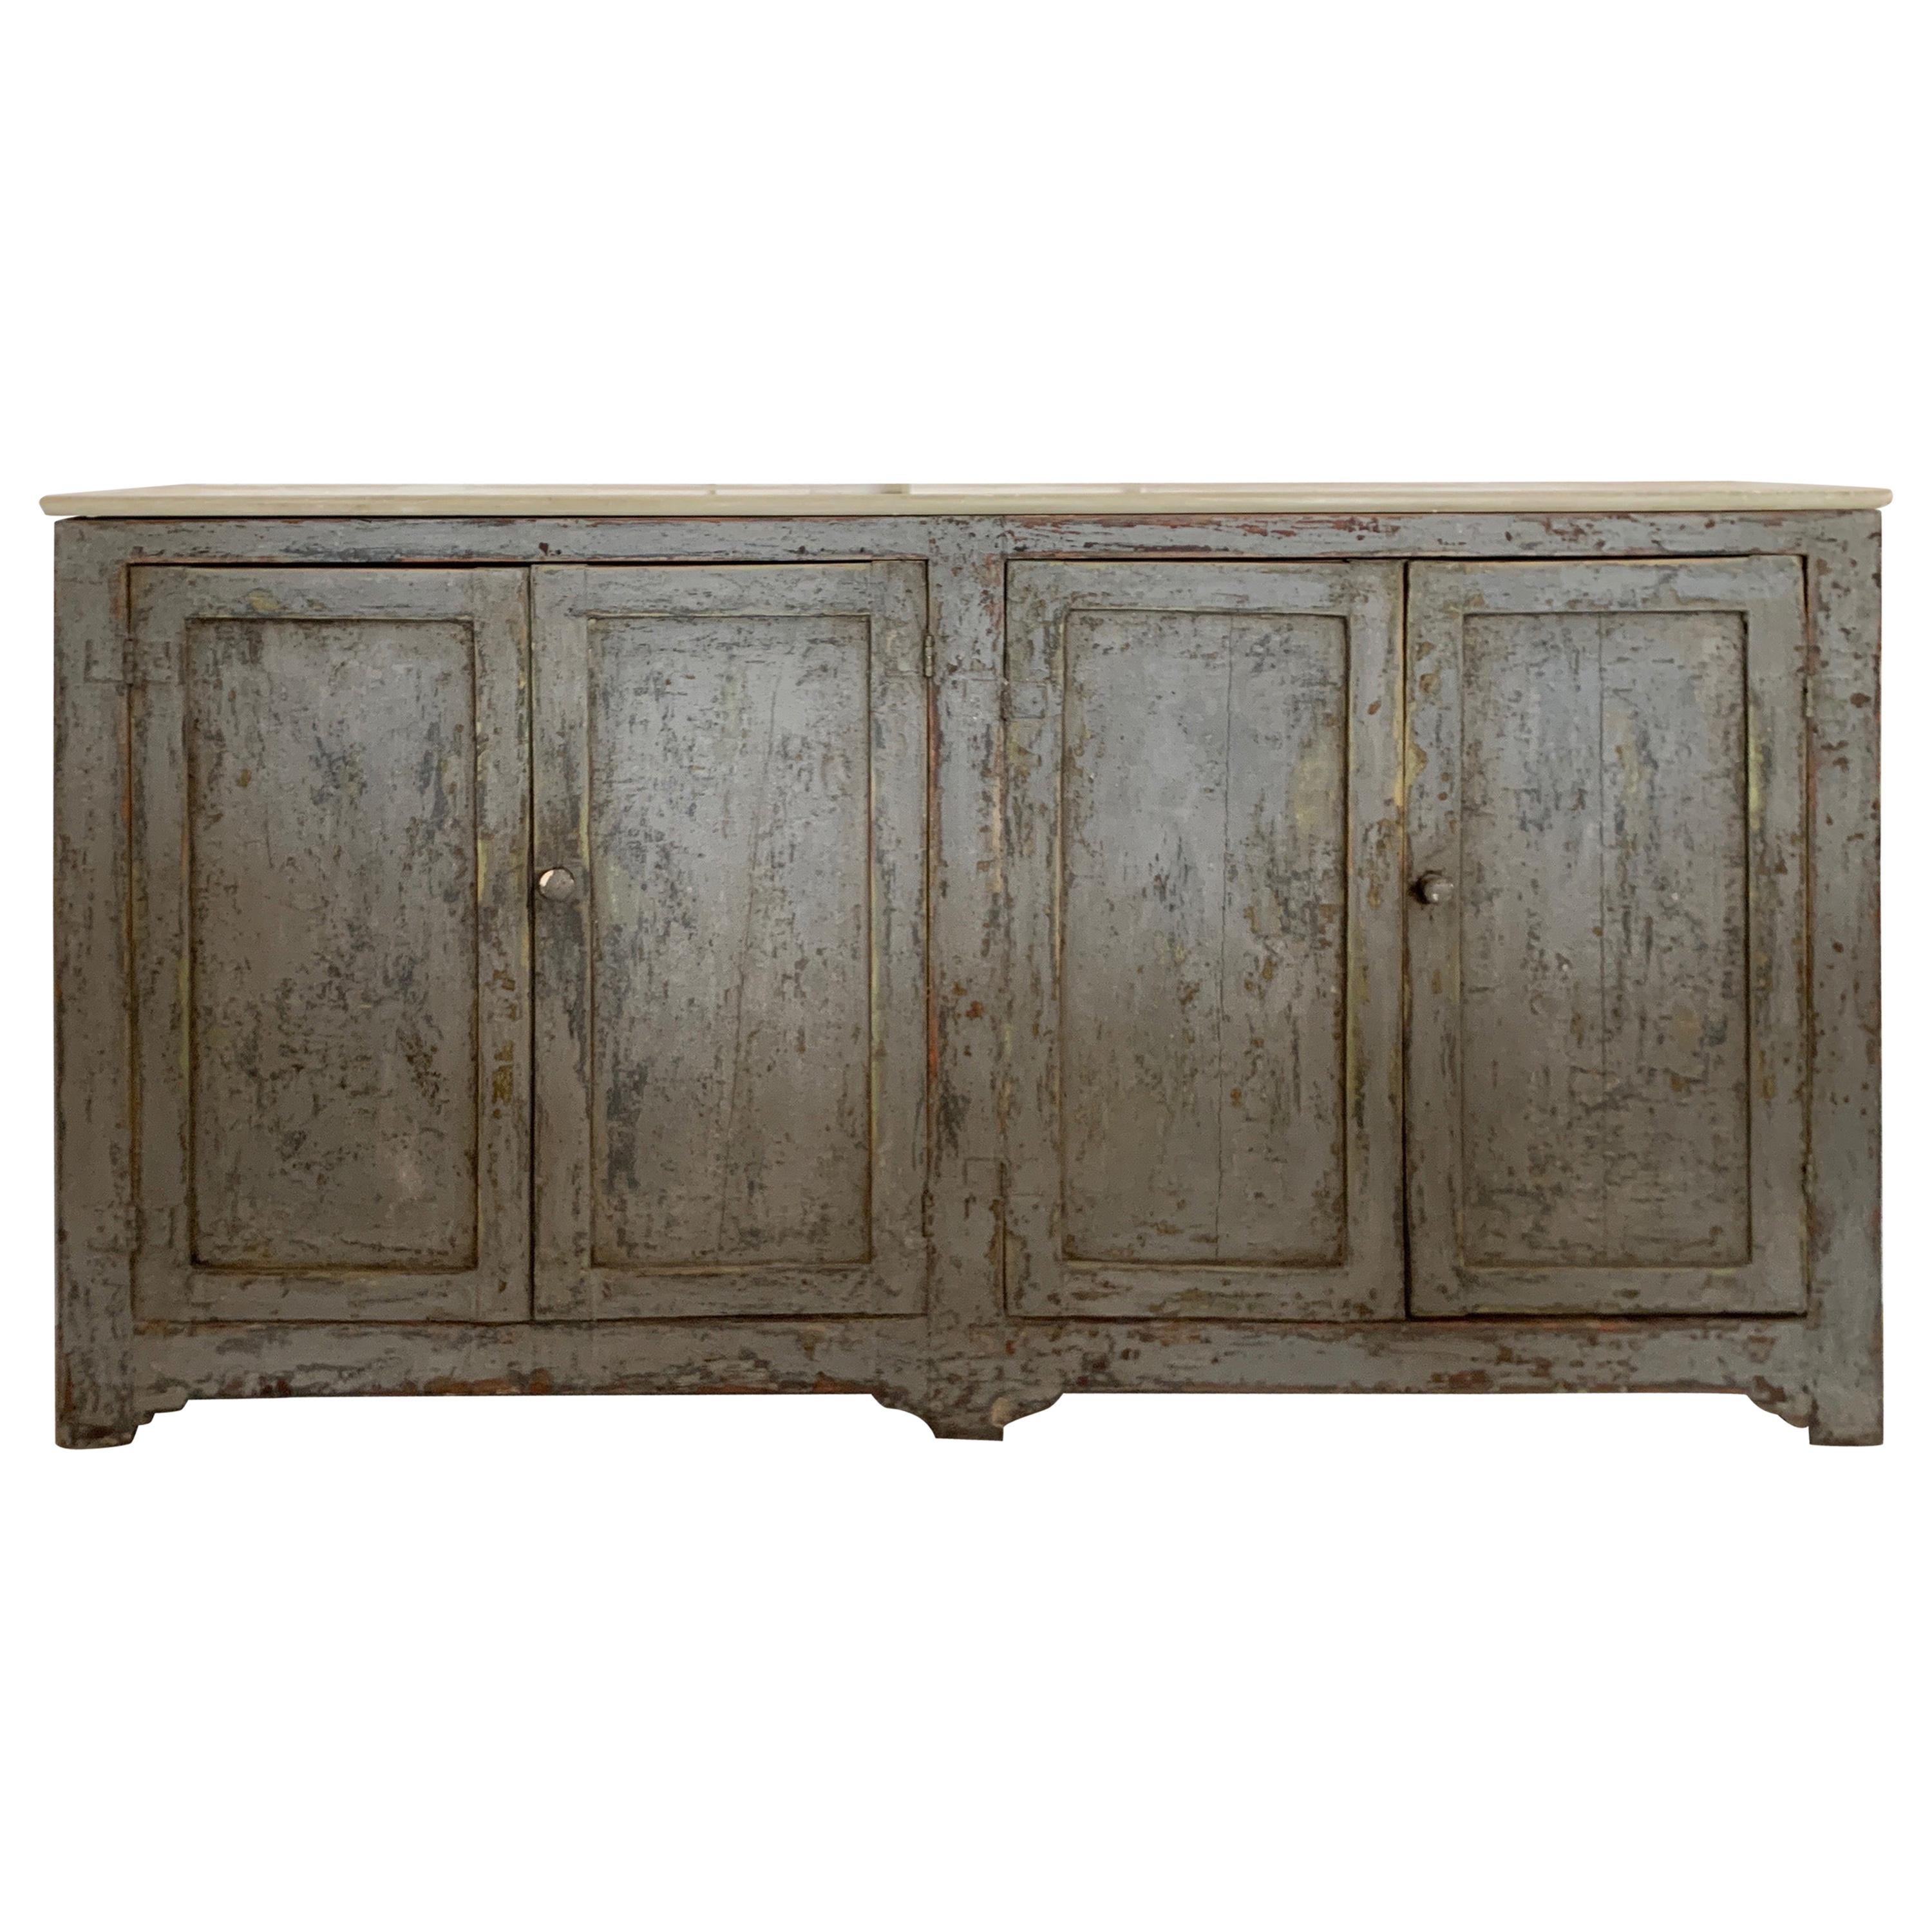 19th Century Spanish Painted Gray Four Door Buffet with Shelf and Marble Top